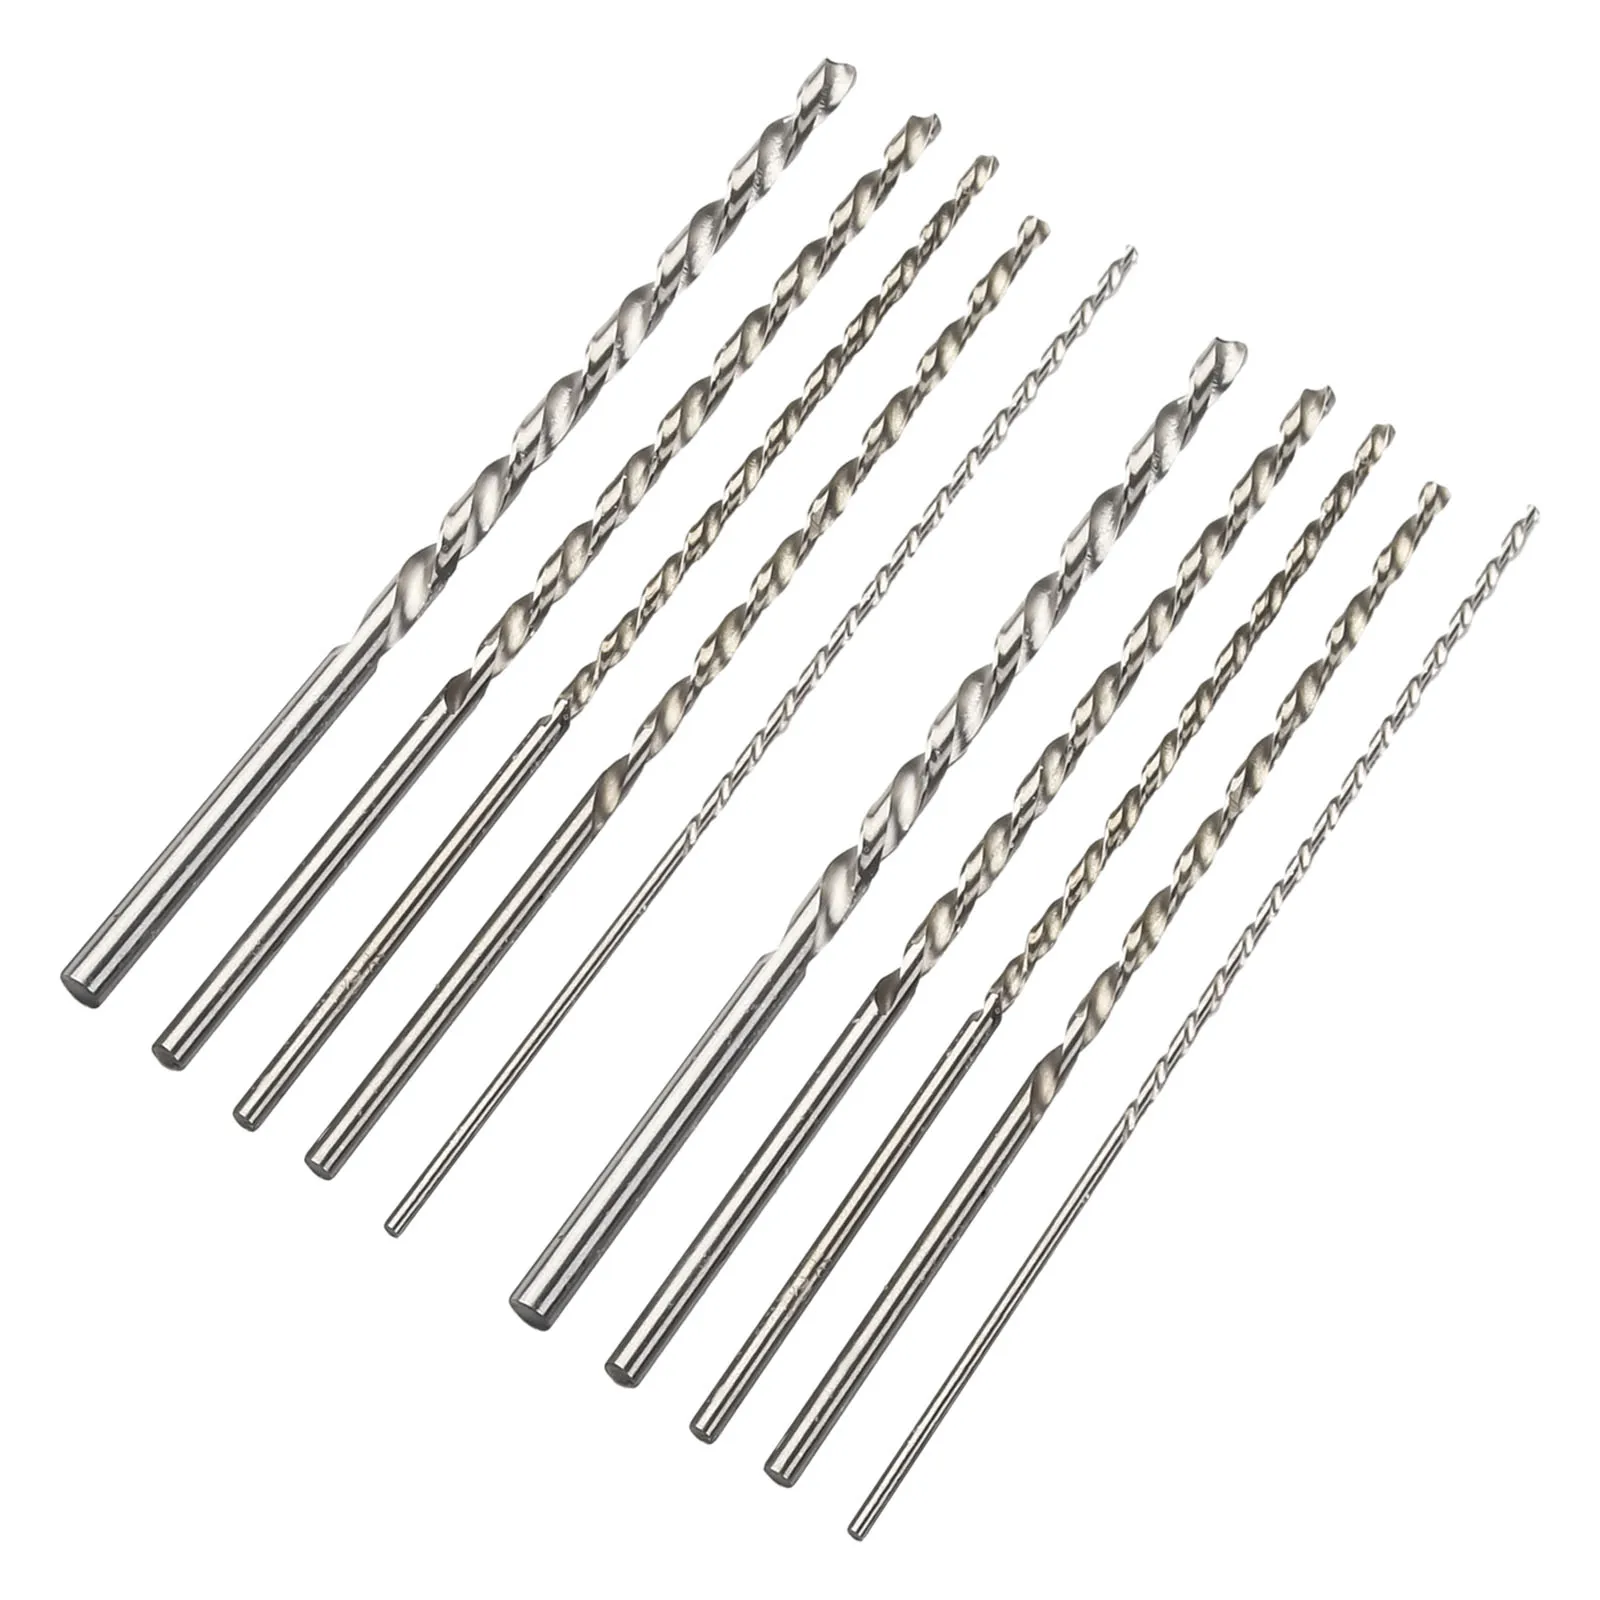 High Speed Steel Bit Set Extra Long HSS Straight Drill Bits Power Tools  For Metal Wood Glass 10Pcs 2mm 3mm 3.5mm 4mm 5mm dremel twisted drill bits accessories set 3 6mm for wood metal glass plastic high quality drill bit woodworking drilling tools